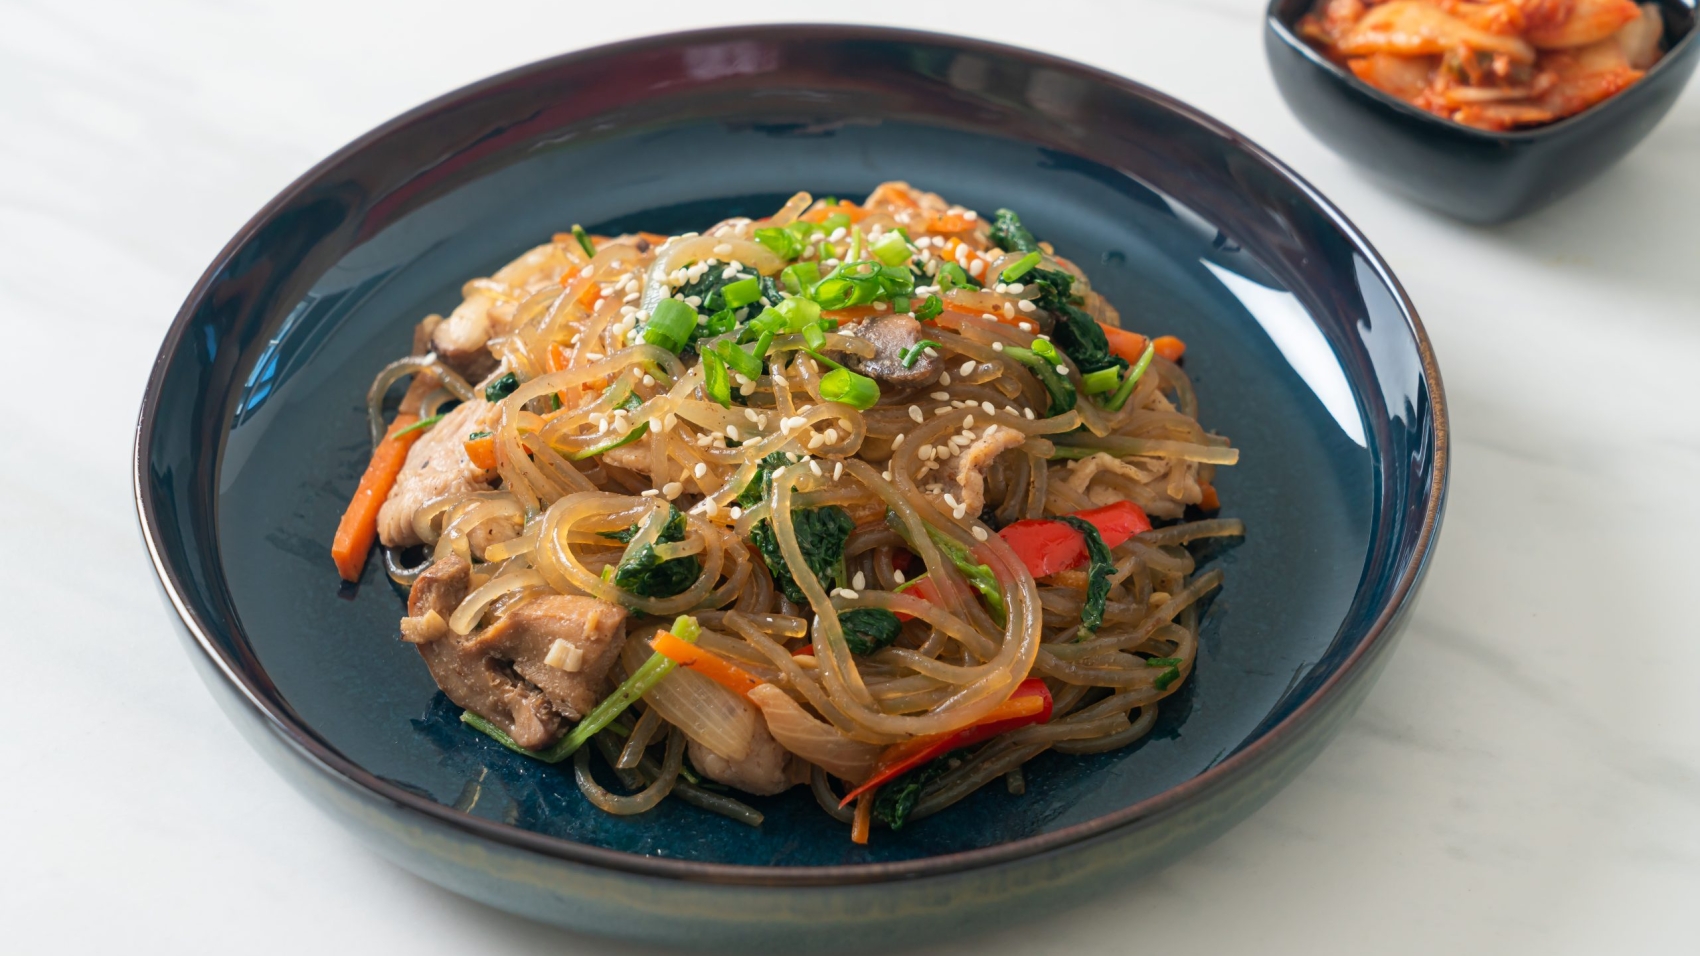 japchae or stir-fried Korean vermicelli noodles with vegetables and pork topped with white sesame - Korean traditional food style